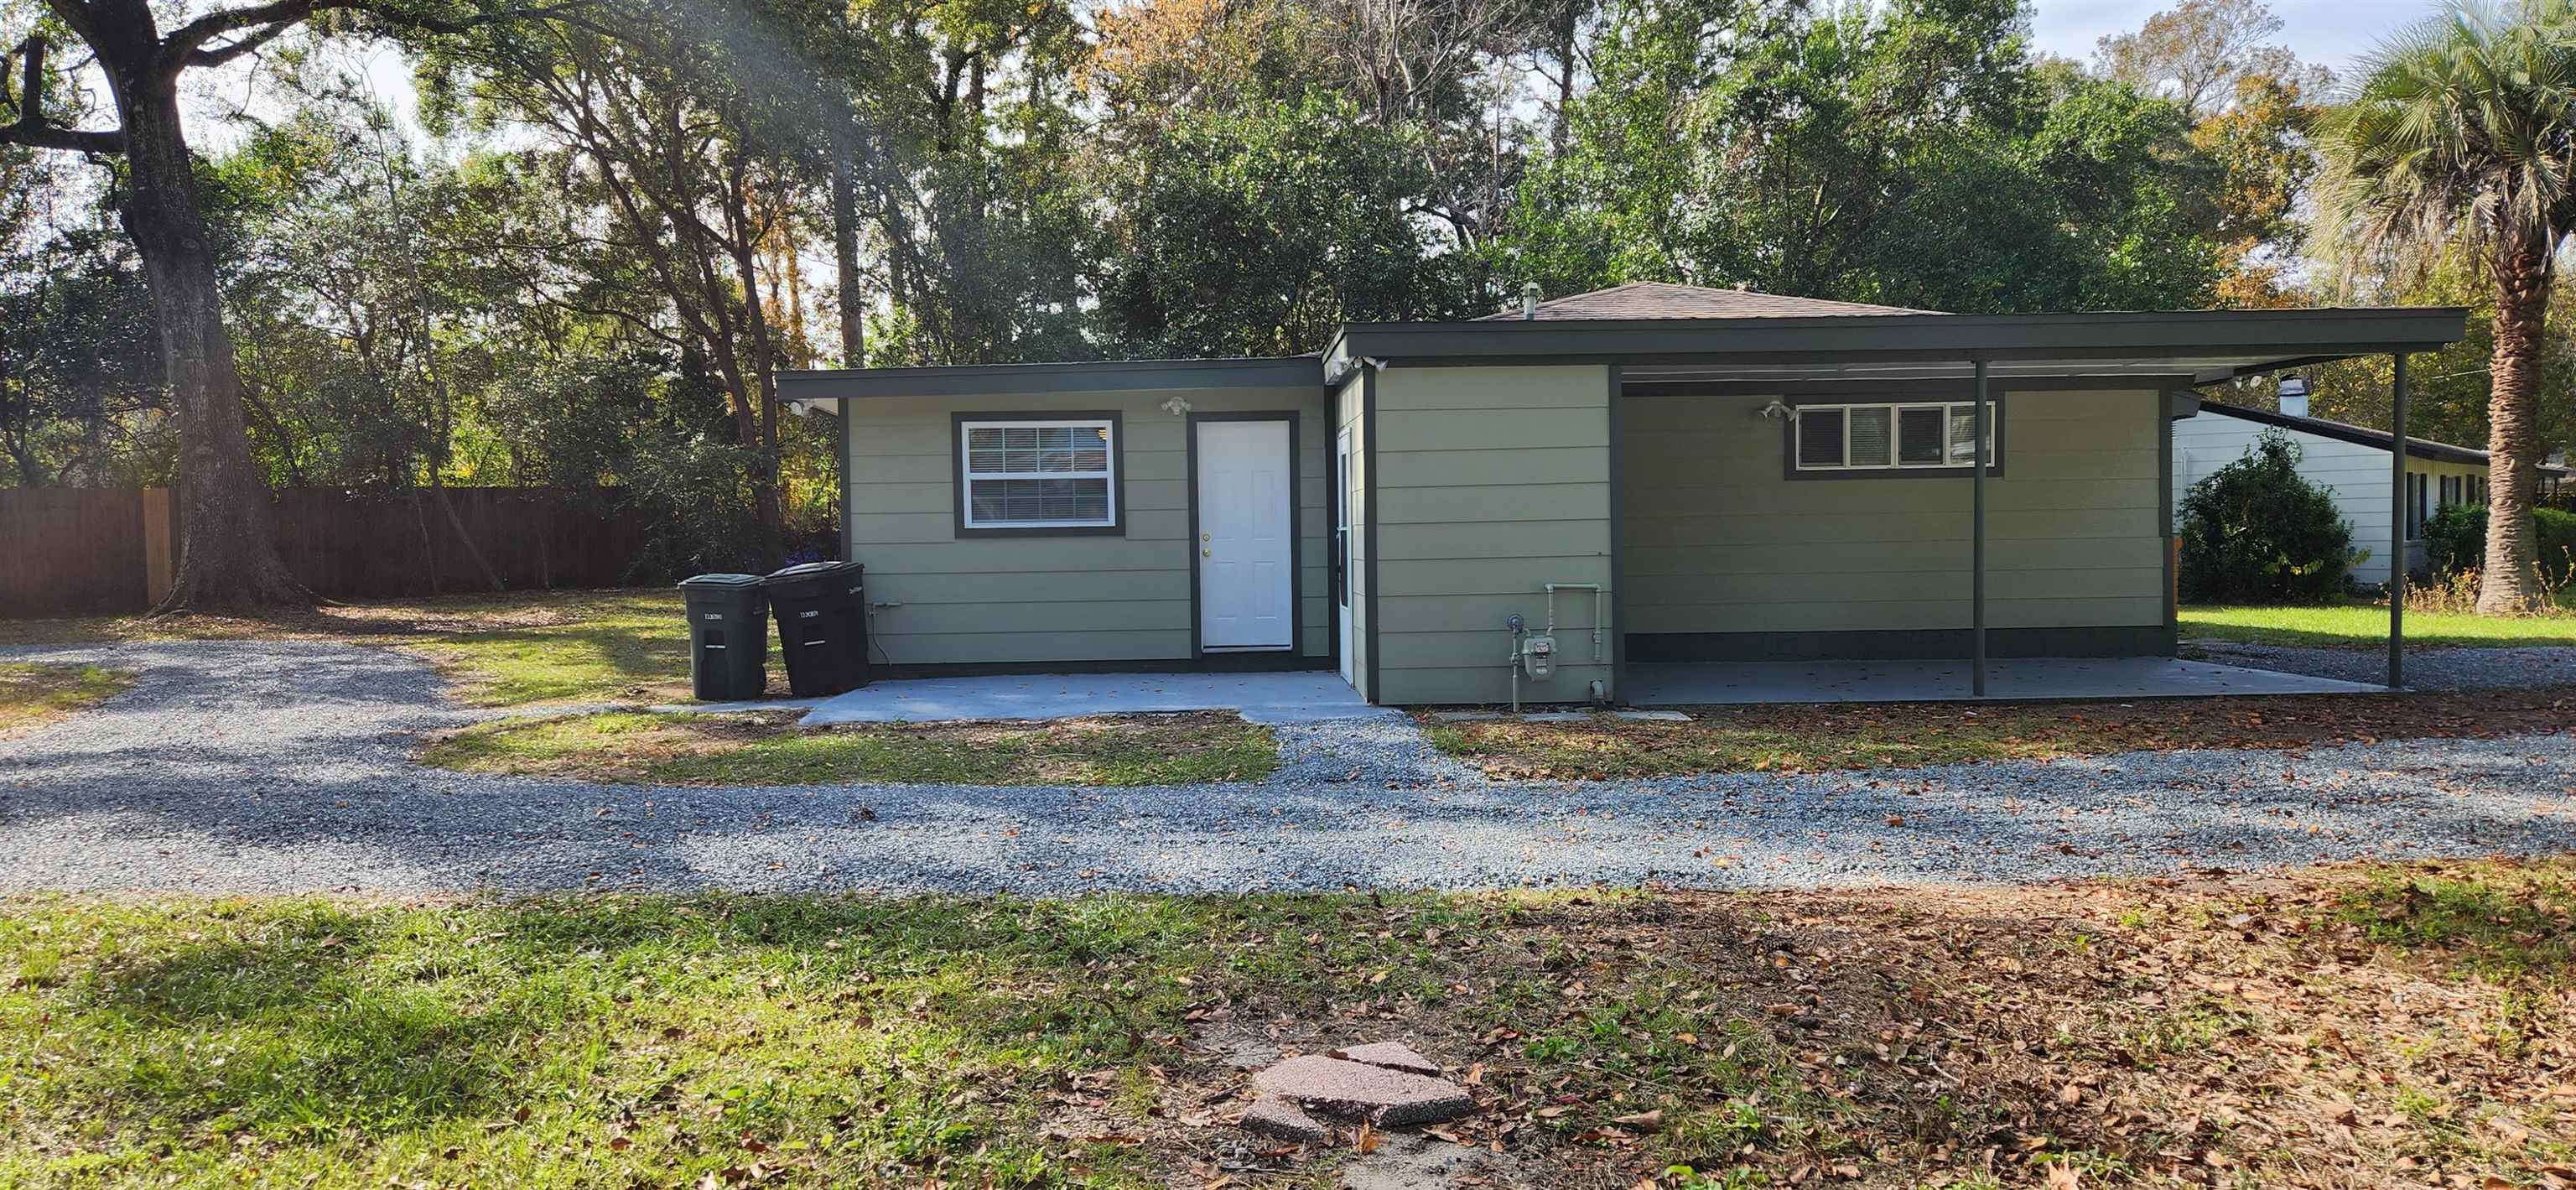 609 Eastwood Drive,TALLAHASSEE,Florida 32301,4 Bedrooms Bedrooms,2 BathroomsBathrooms,Detached single family,609 Eastwood Drive,365854